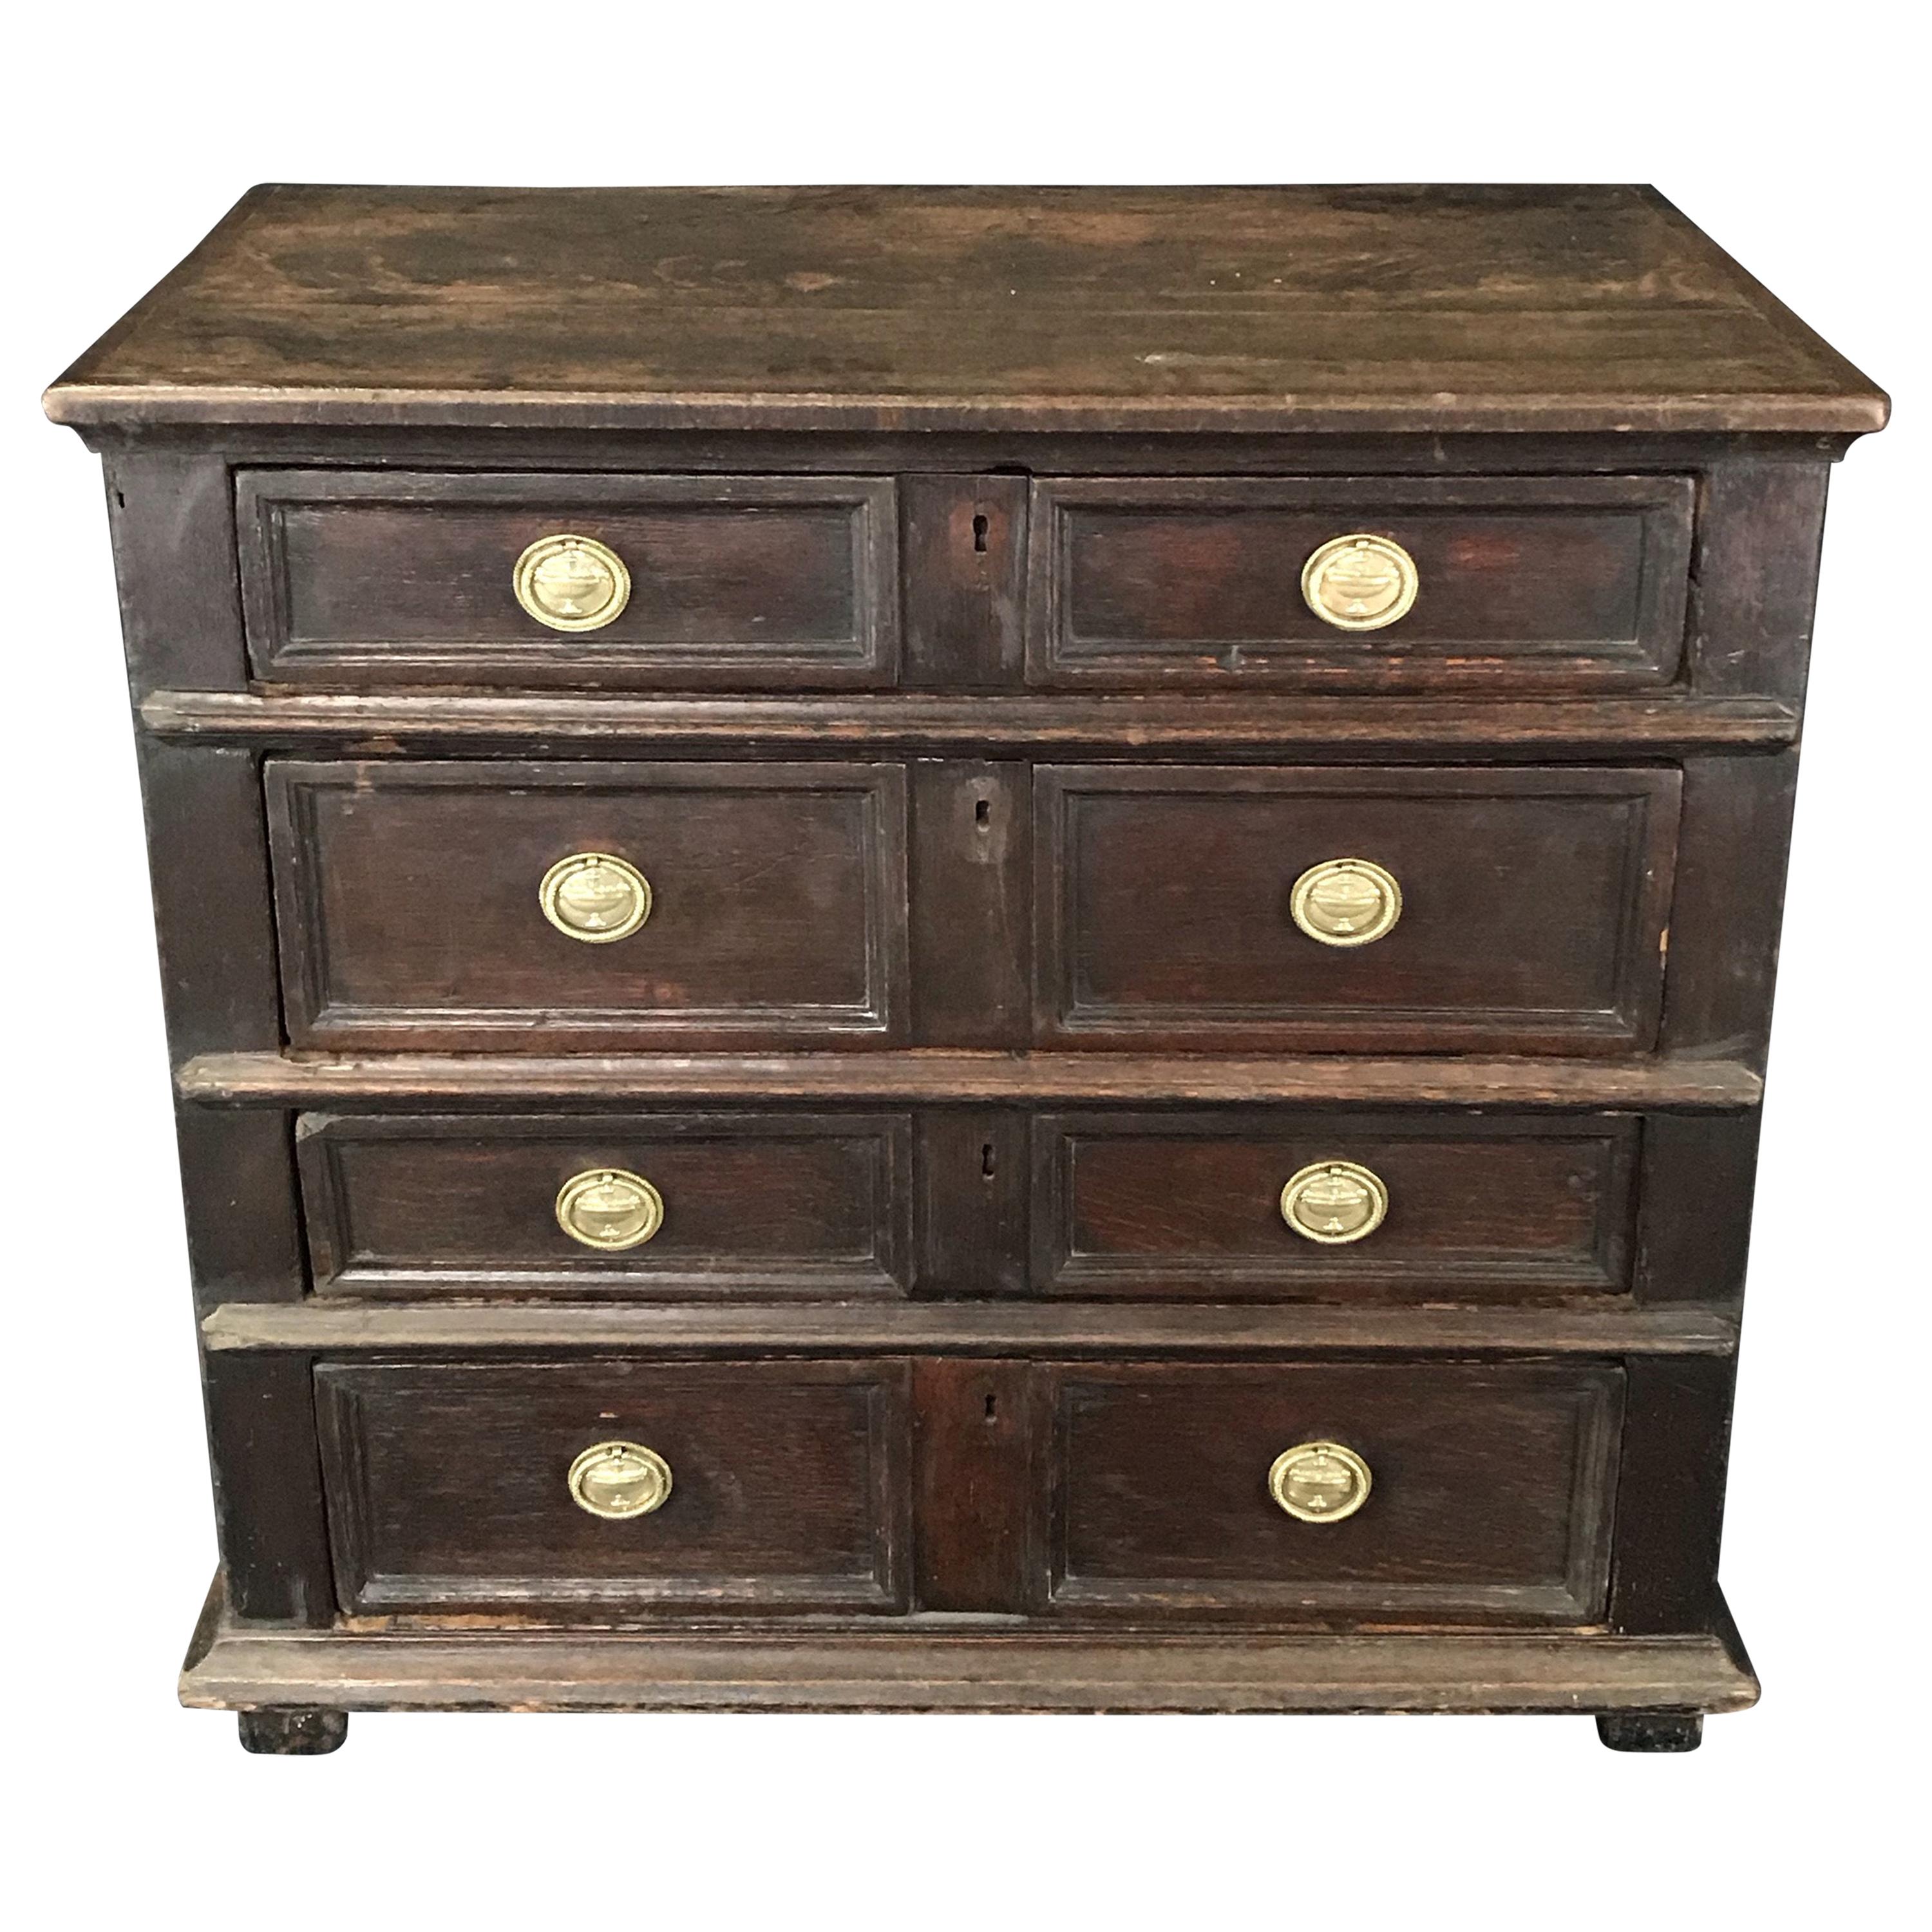 Character Rich Mid-17th Century Charles II Period Oak Chest of Drawers